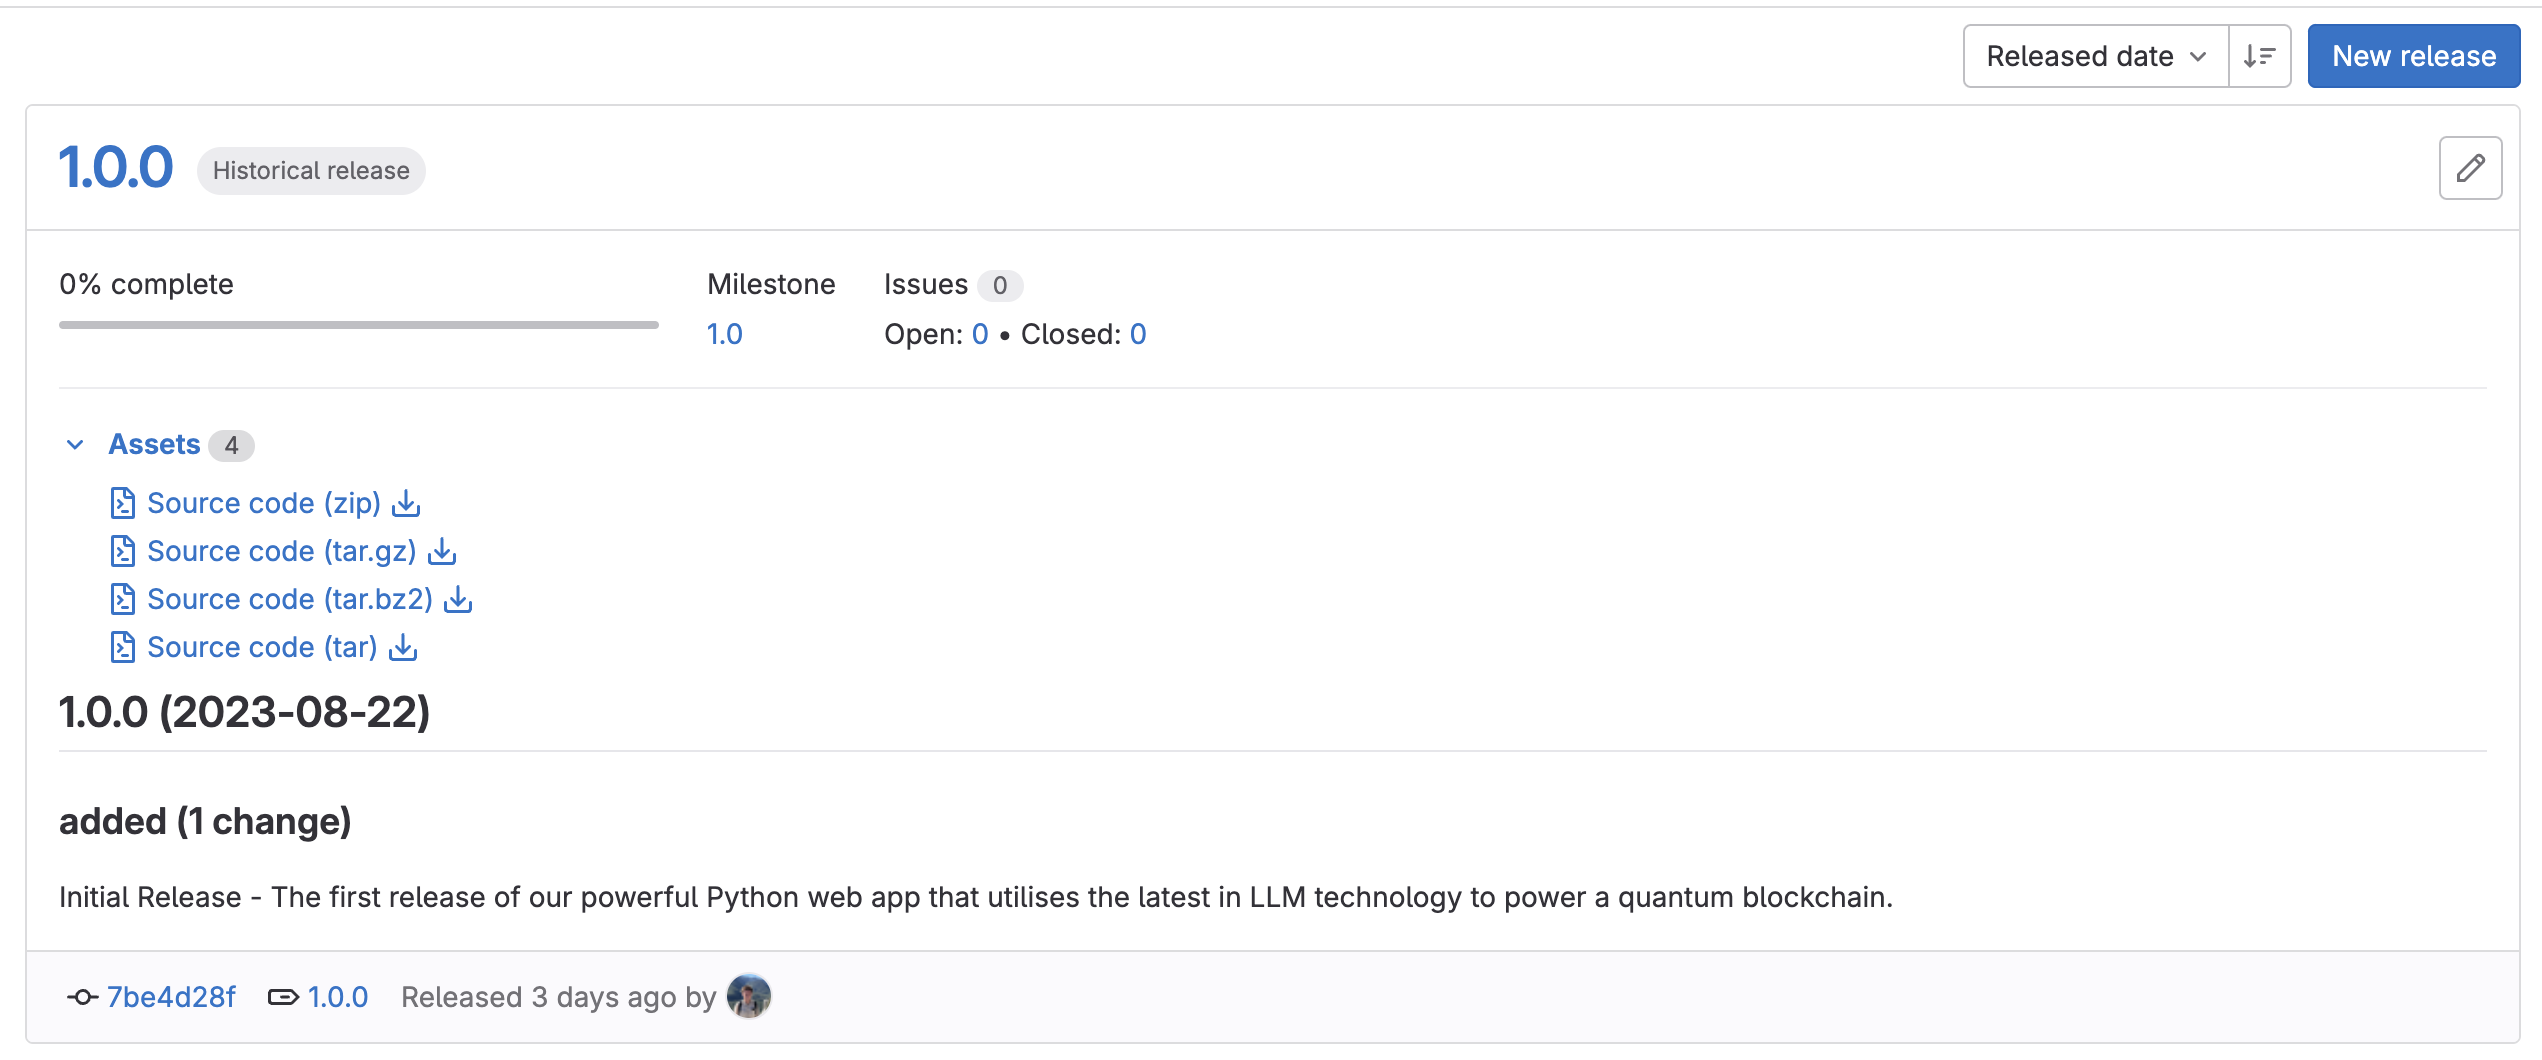 A screenshot of the GitLab UI showing a release for version 1.0.0